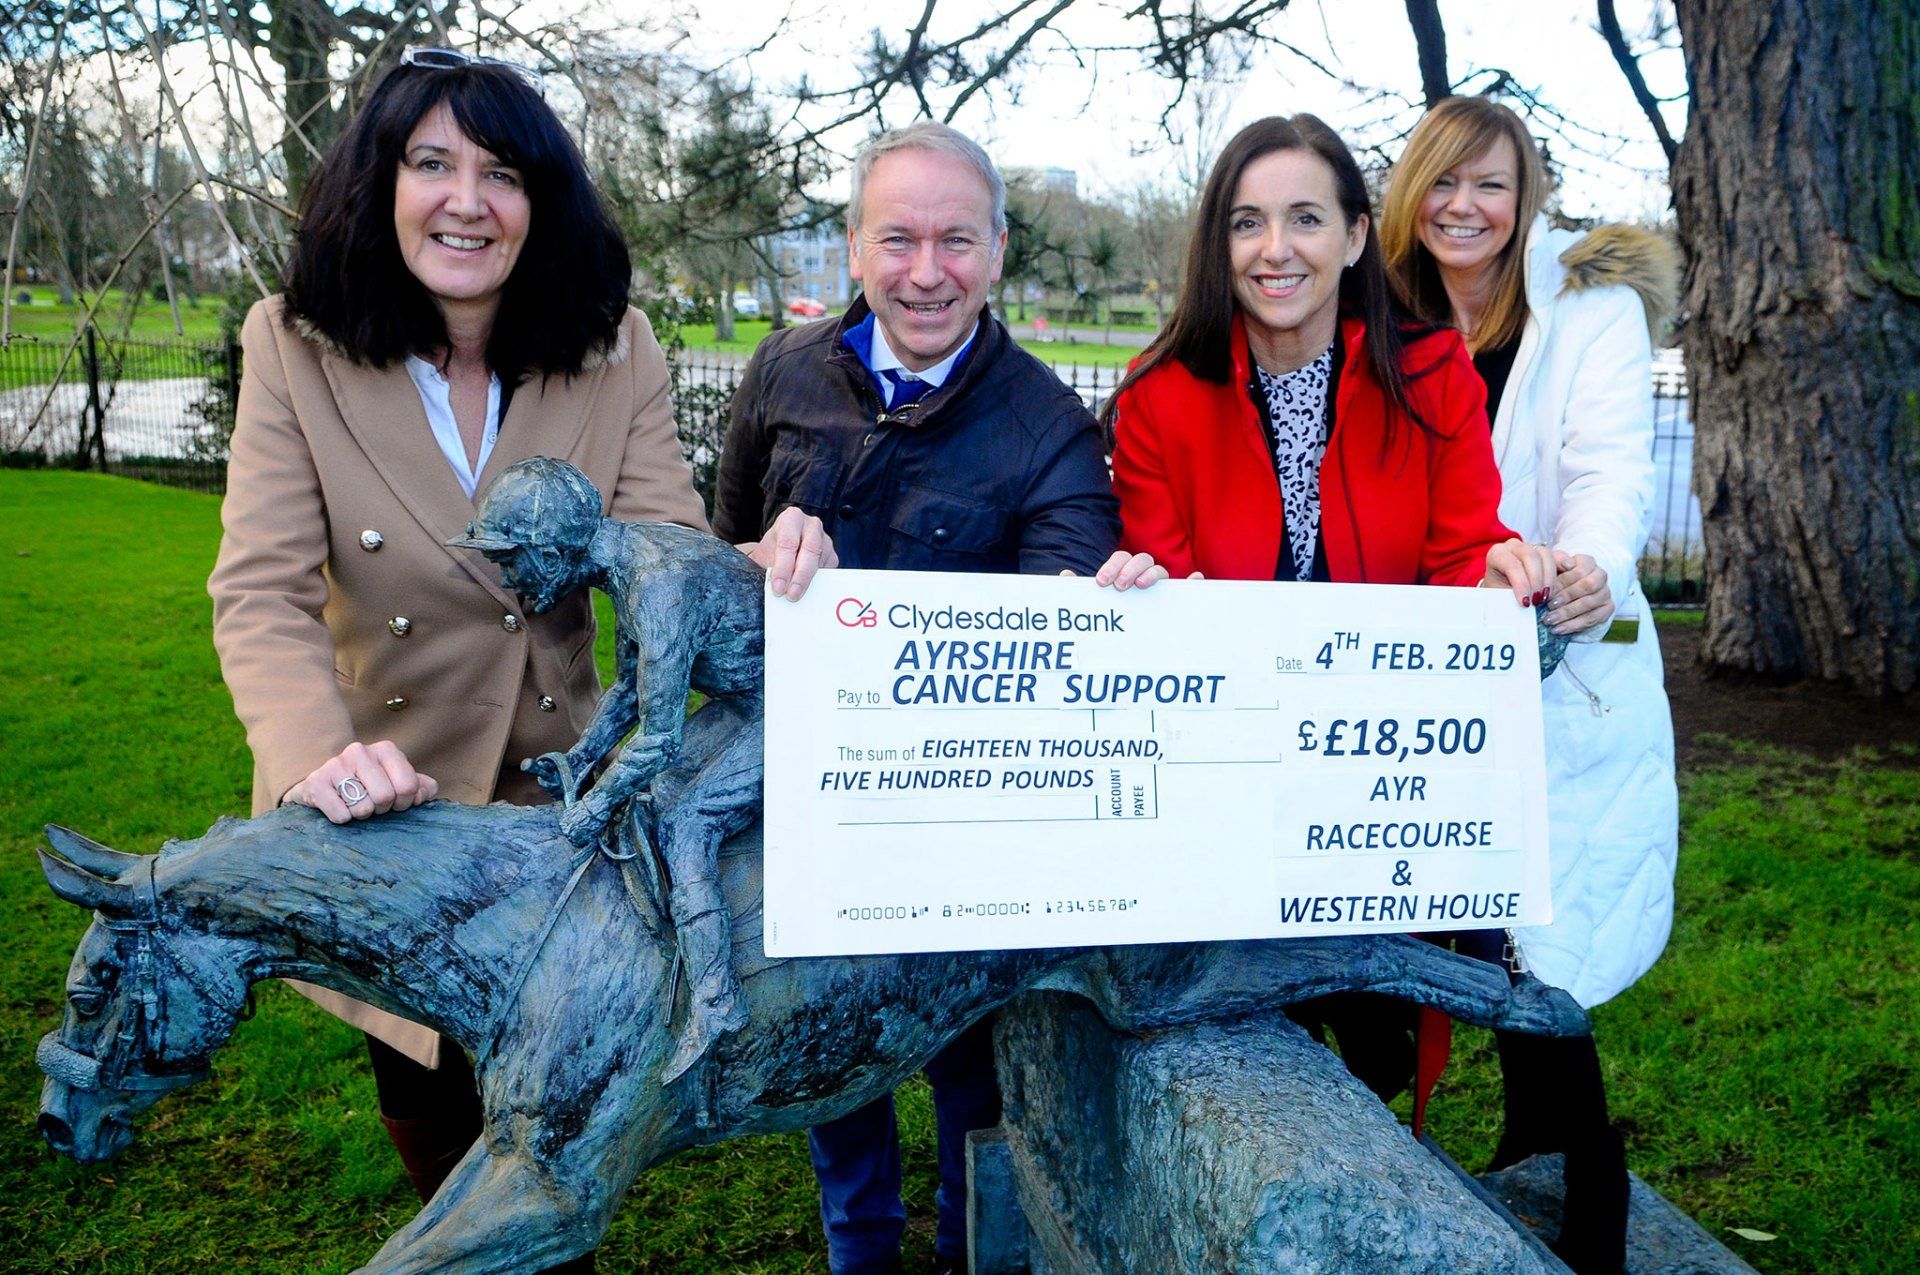 Left to right: Laura Brown (ACS), David Brown (Managing Director, Ayr Racecourse and Western House), Nicola Eyres (ACS) and Lindsey Smith (Sales and Marketing, Ayr Racecourse)